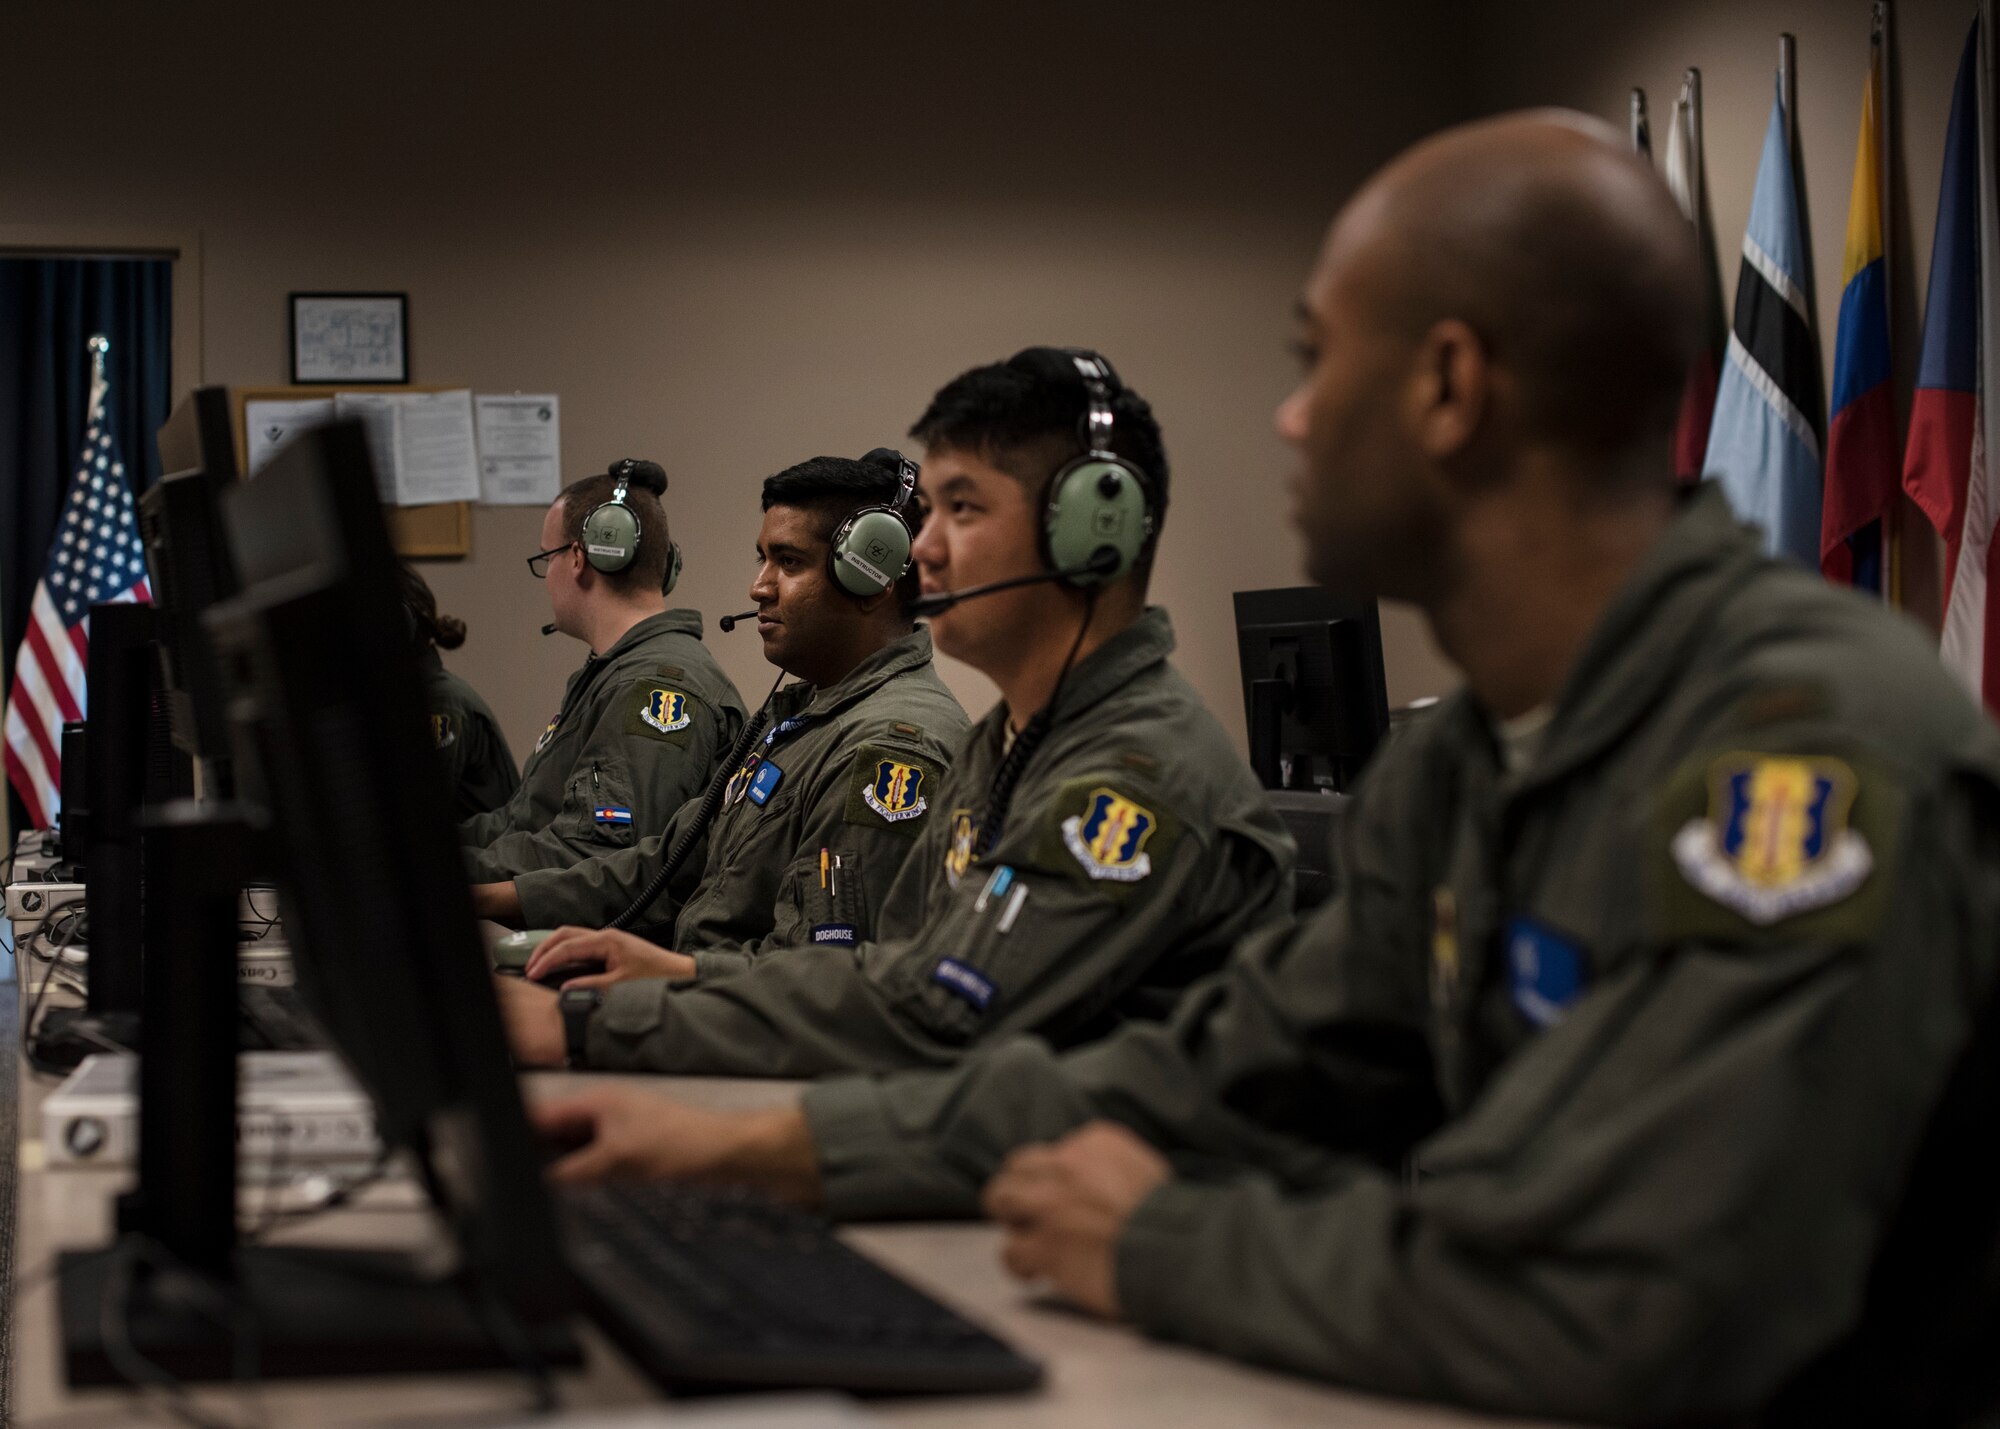 Air battle manager students assigned to the 337th Air Control Squadron accomplish a task April 18, 2018, at Tyndall Air Force Base, Fla. These students are taught to think outside the box and foster creativity to execute assignments in better, more precise ways. (U.S. Air Force photo by Airman 1st Class Emily Smallwood)